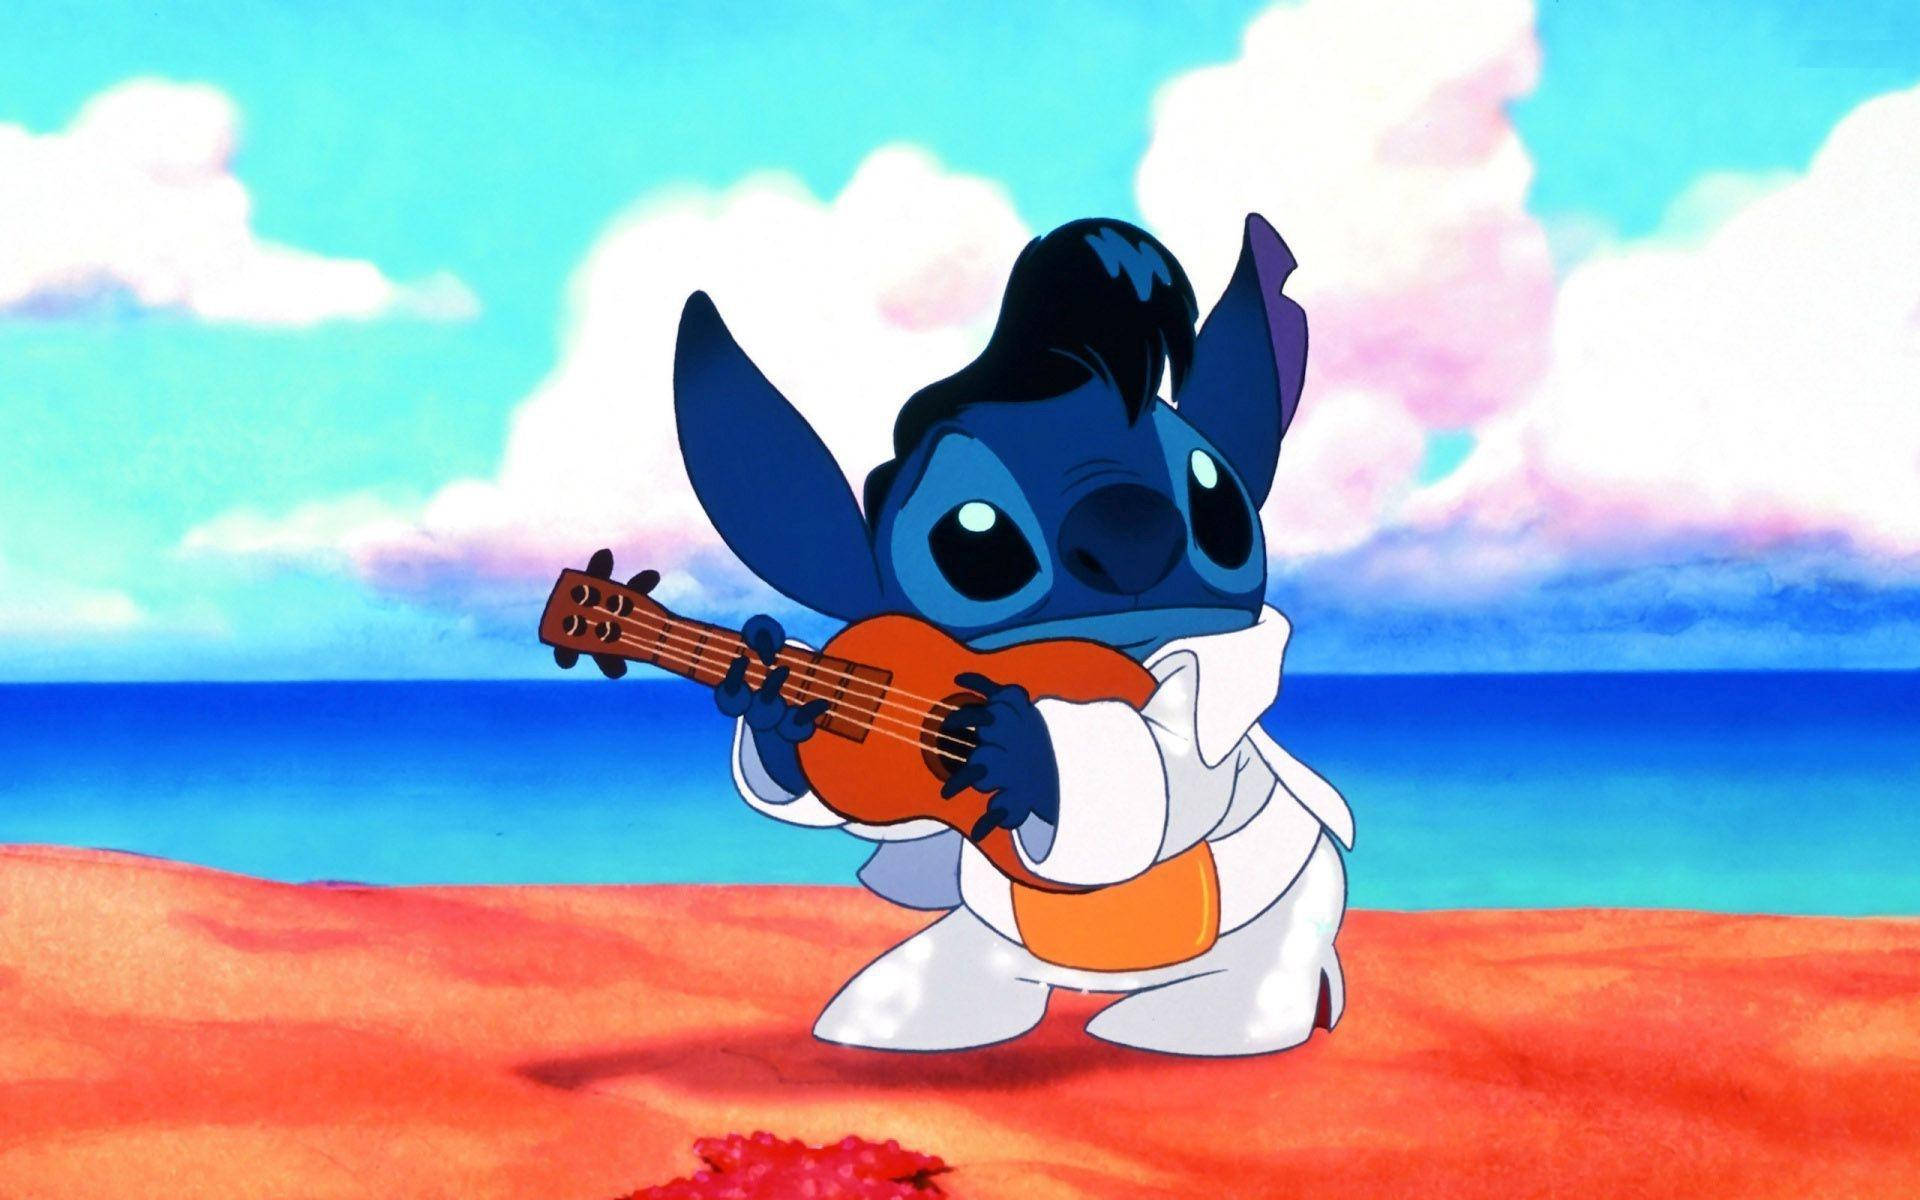 Cute Aesthetic Stitch With Guitar